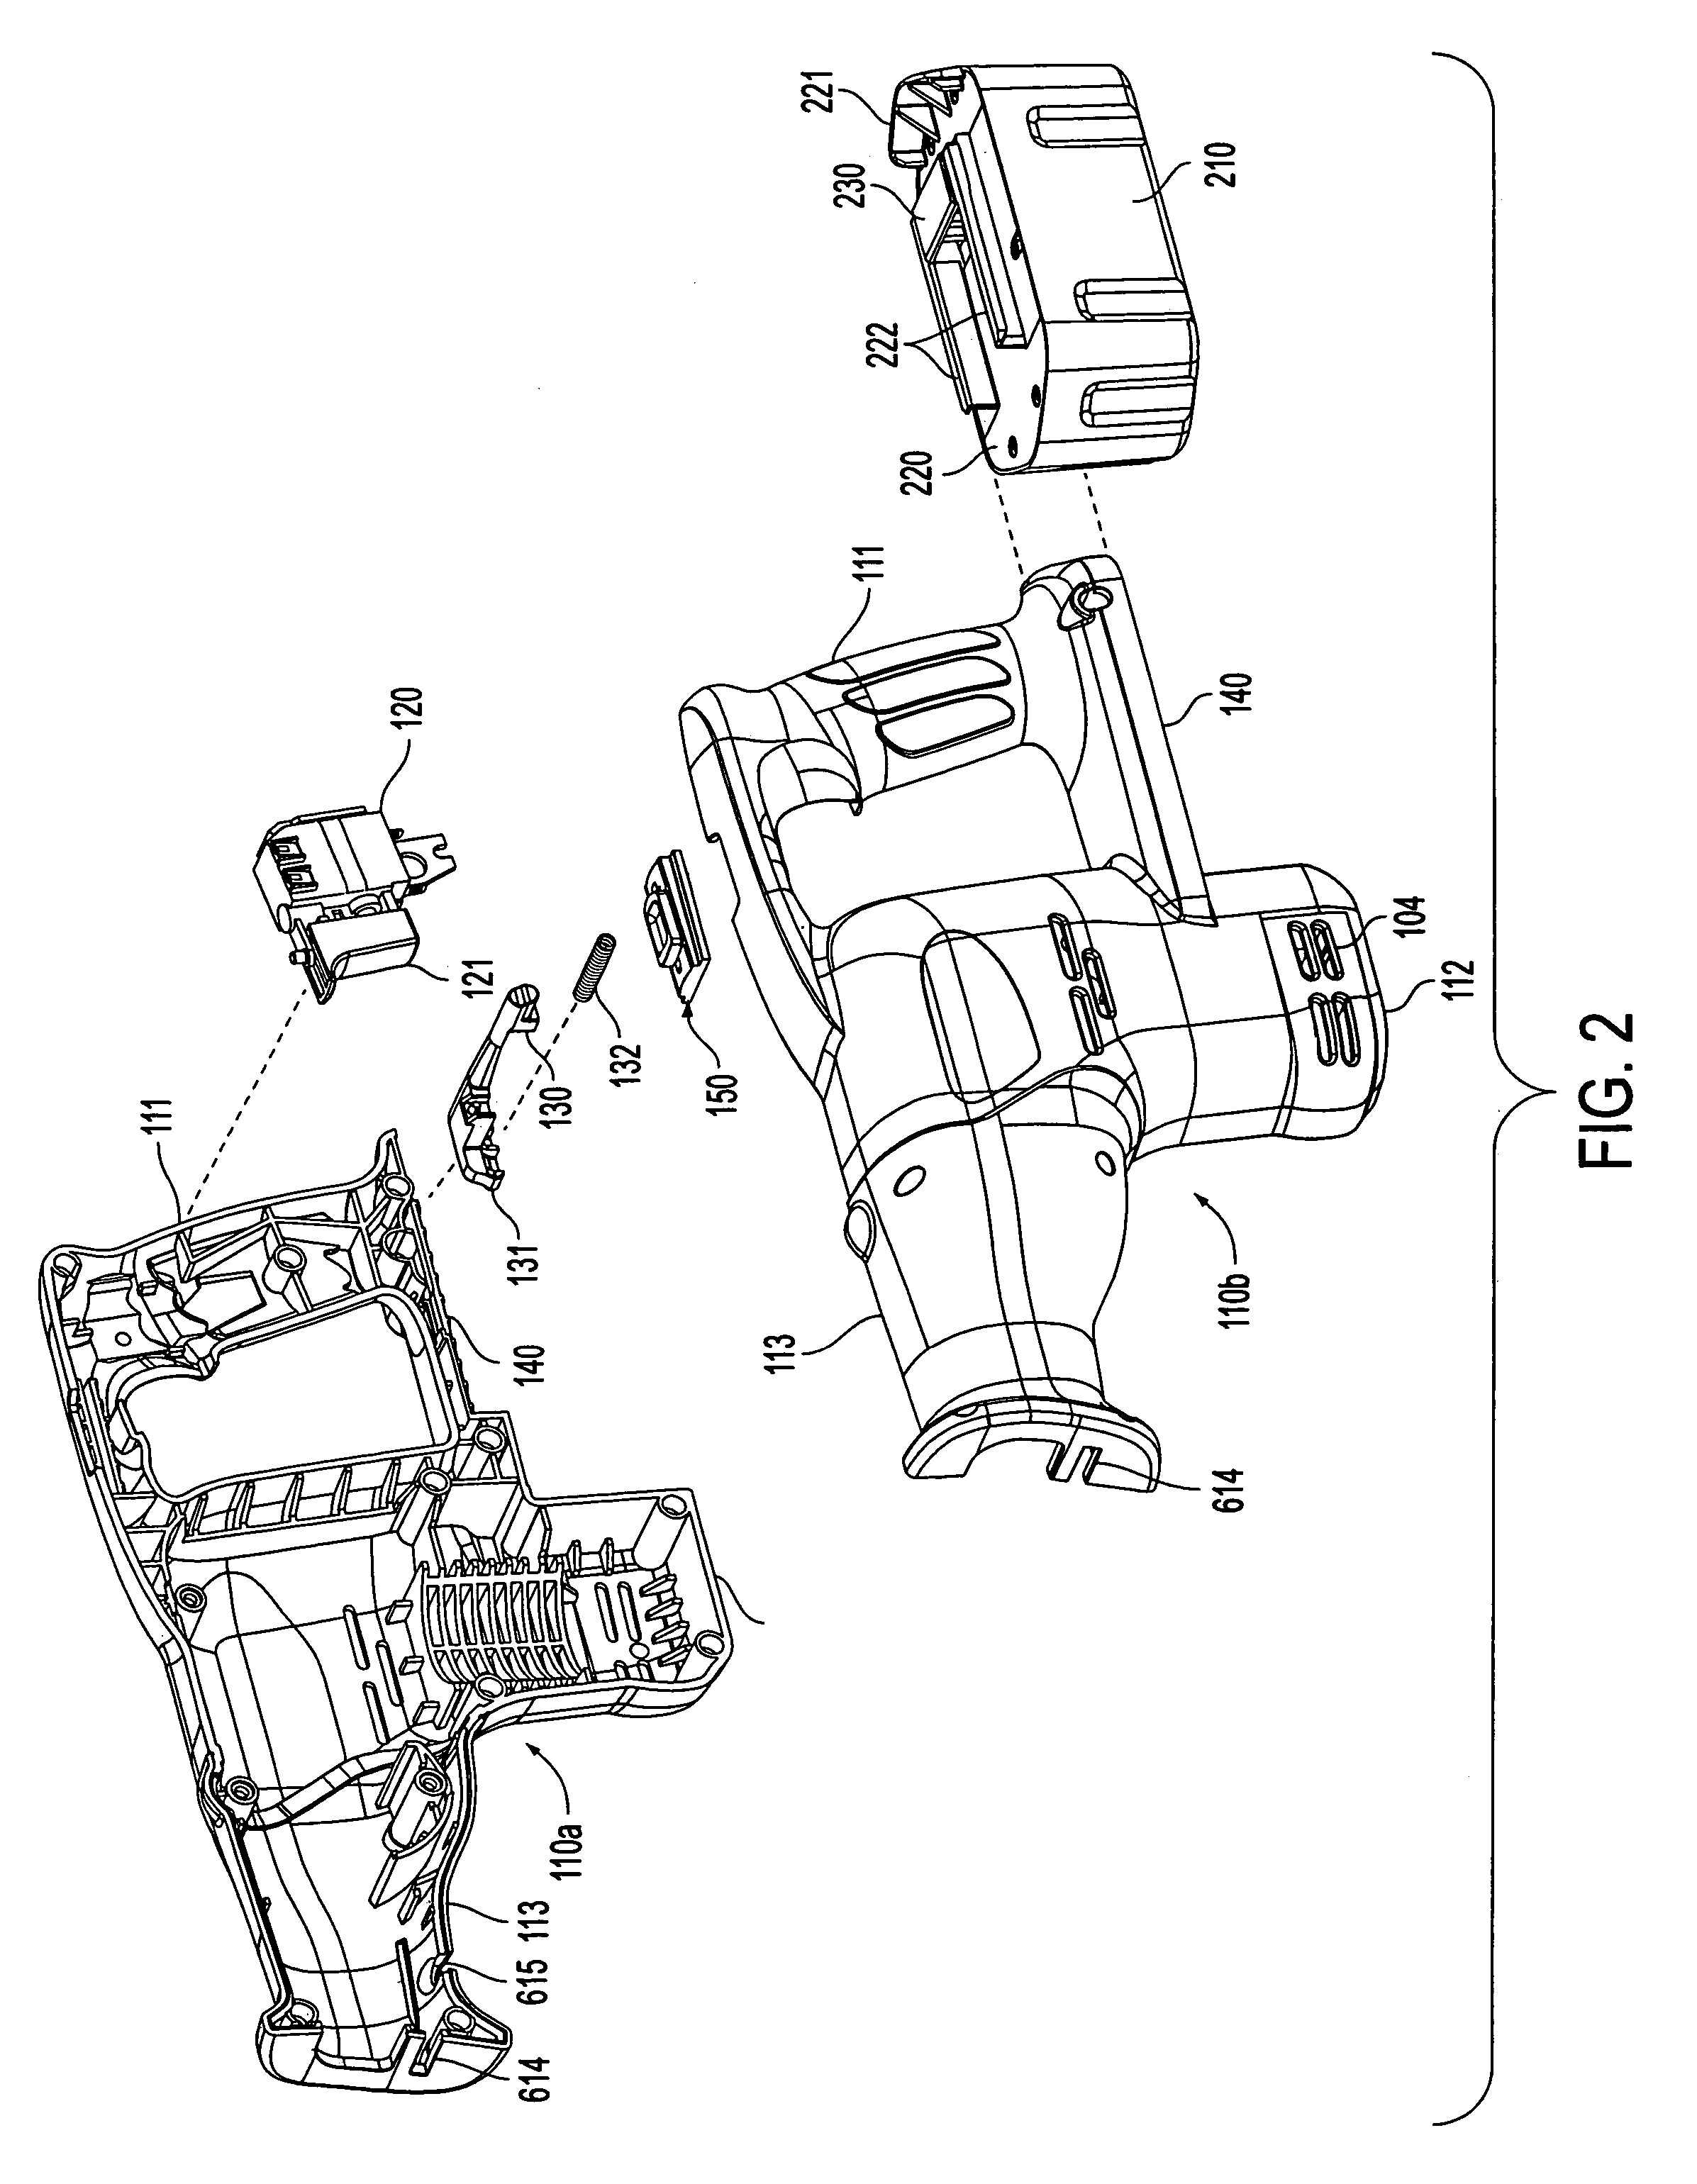 Reciprocating counterweight structure for a reciprocating saw